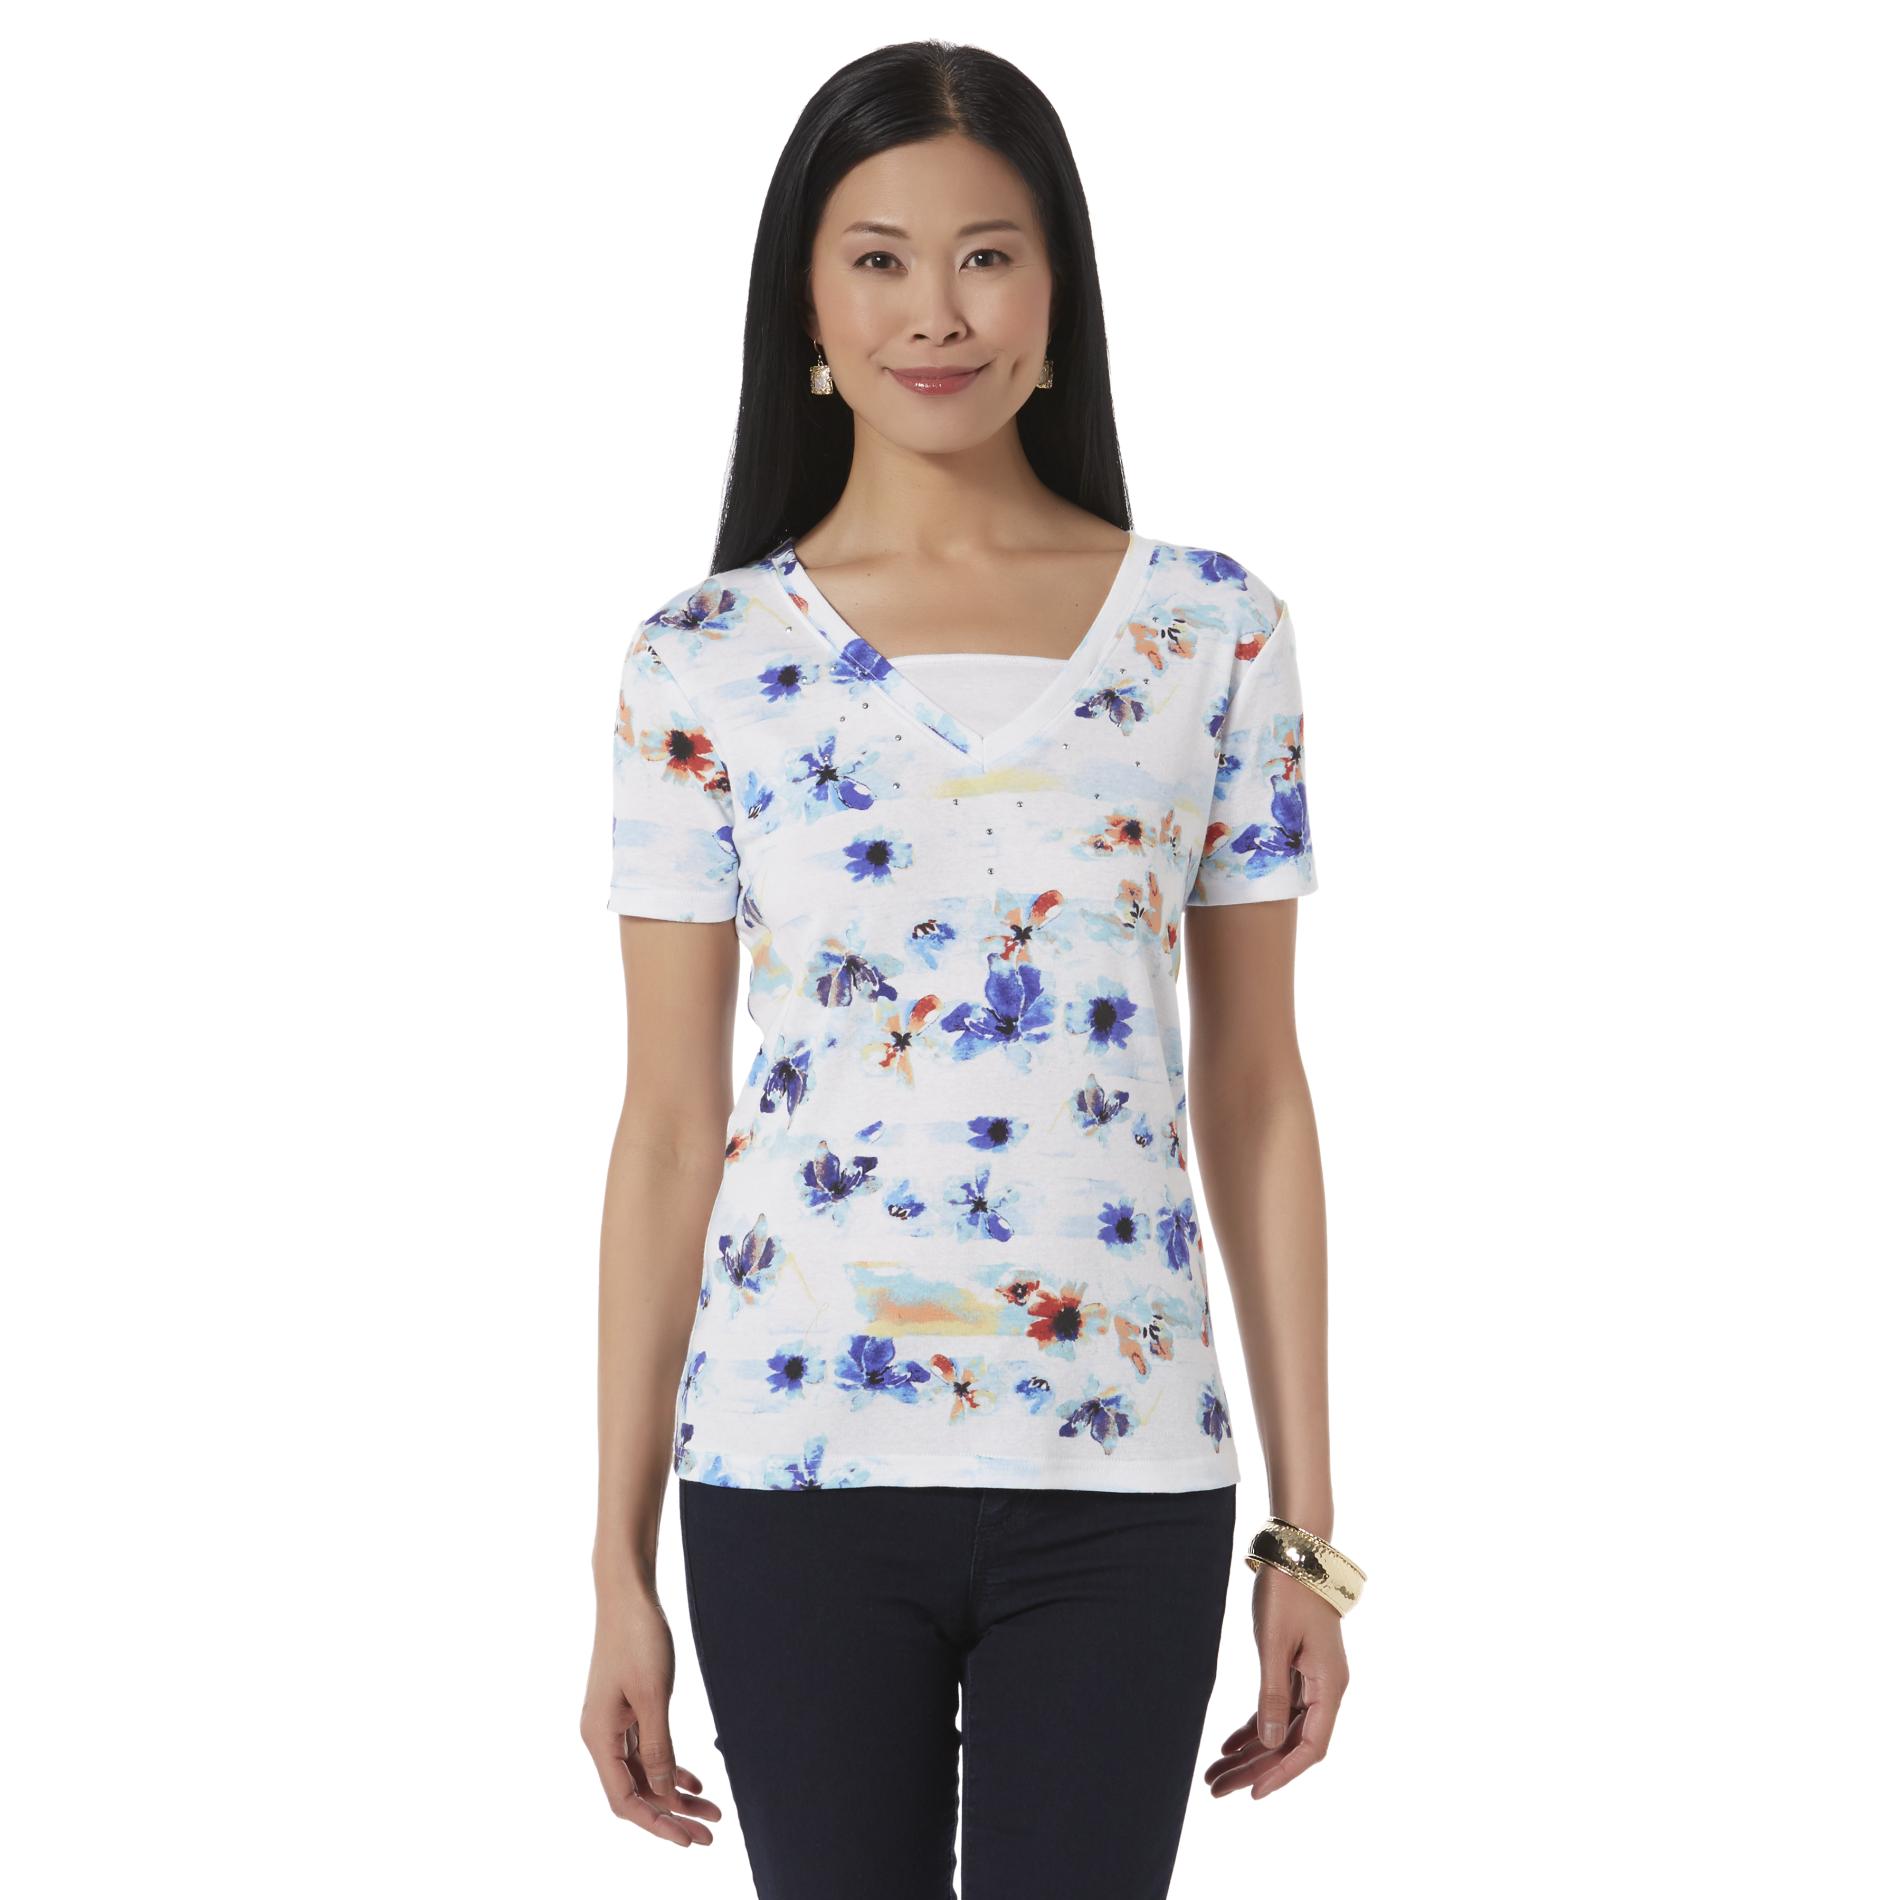 Basic Editions Women's Layered-Look V-Neck Top - Floral Print